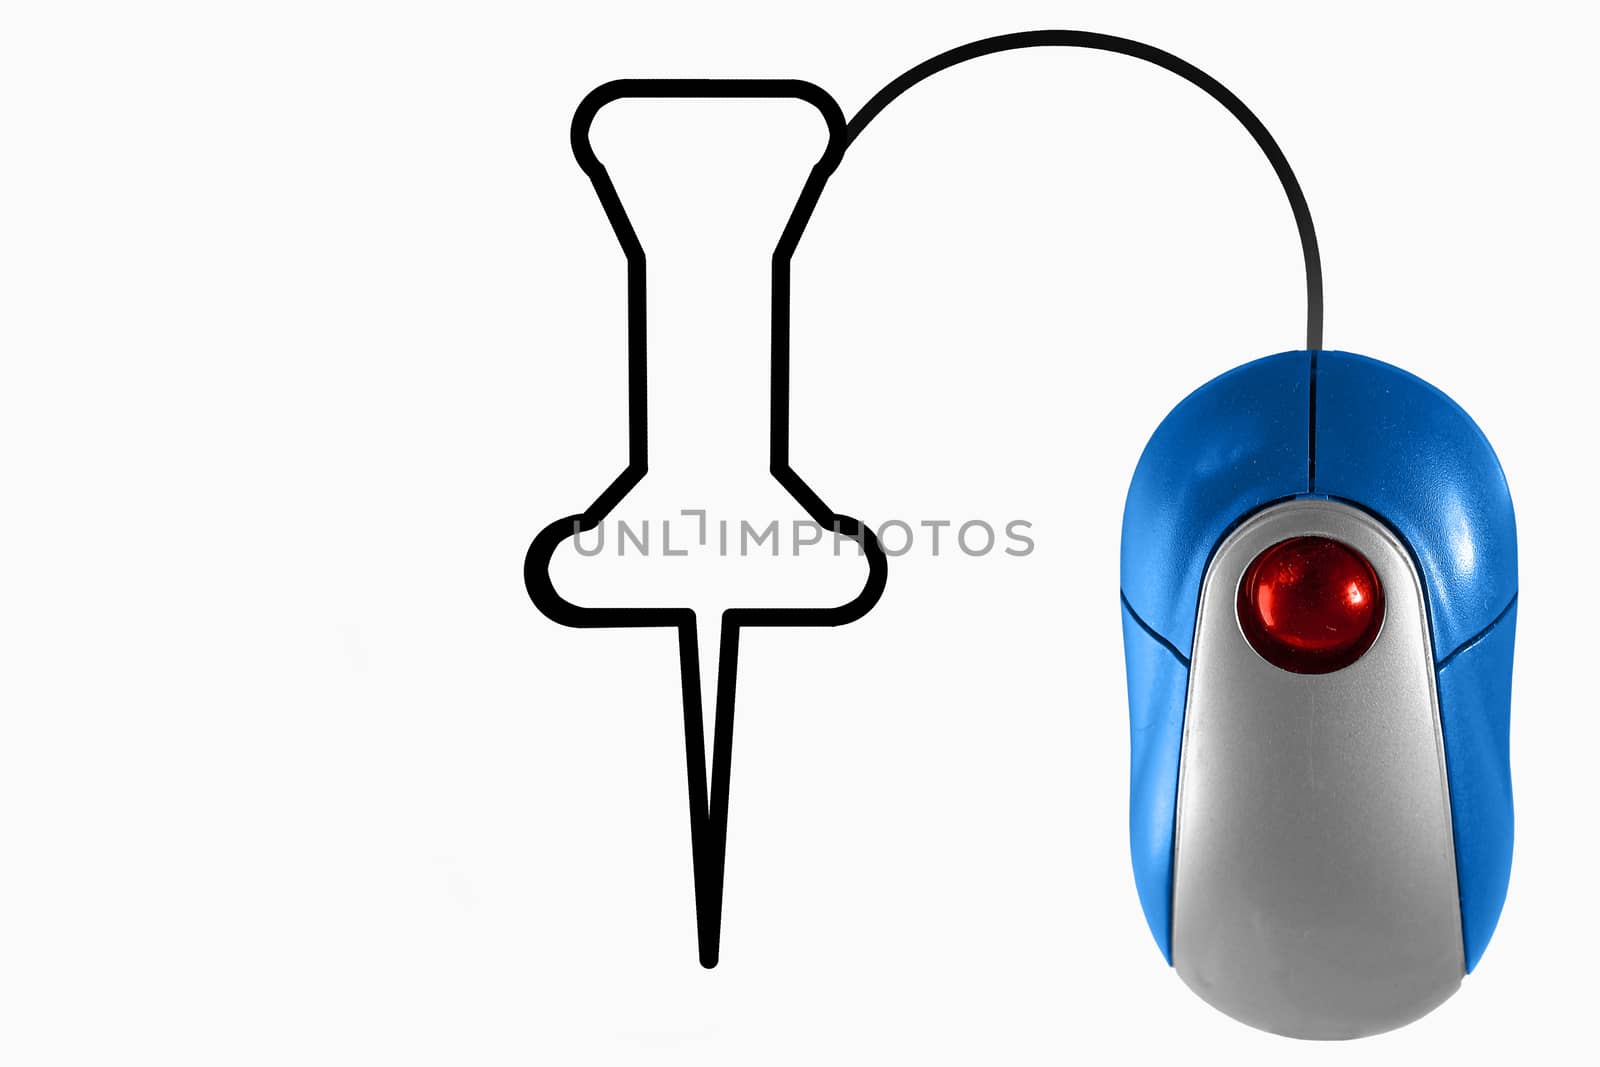 Pushpin depicted by computer mouse cable